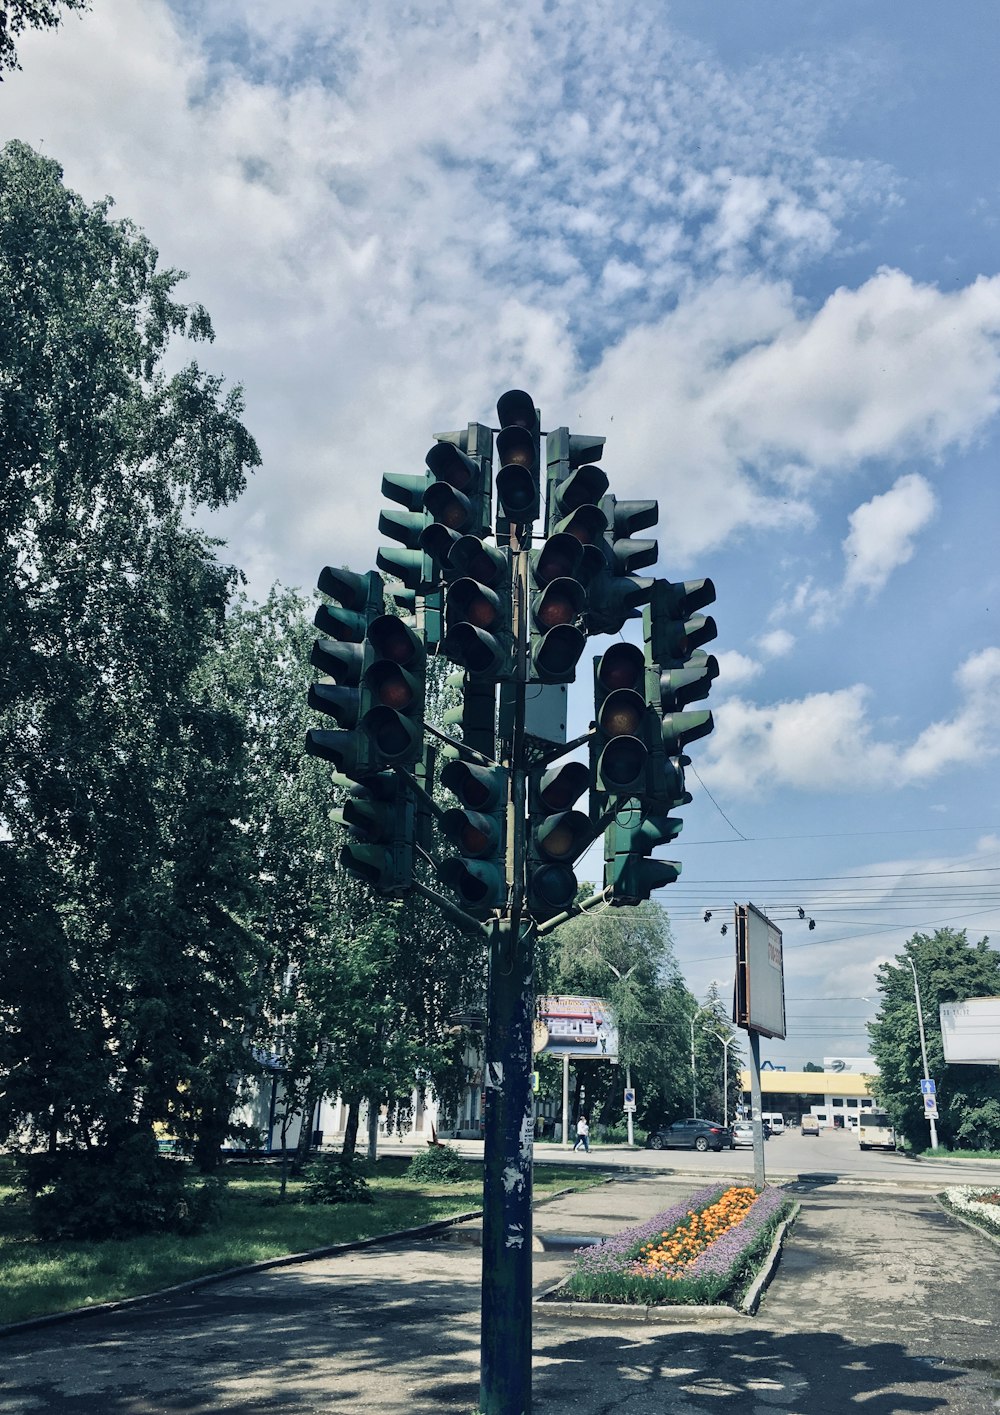 traffic light with green light during daytime